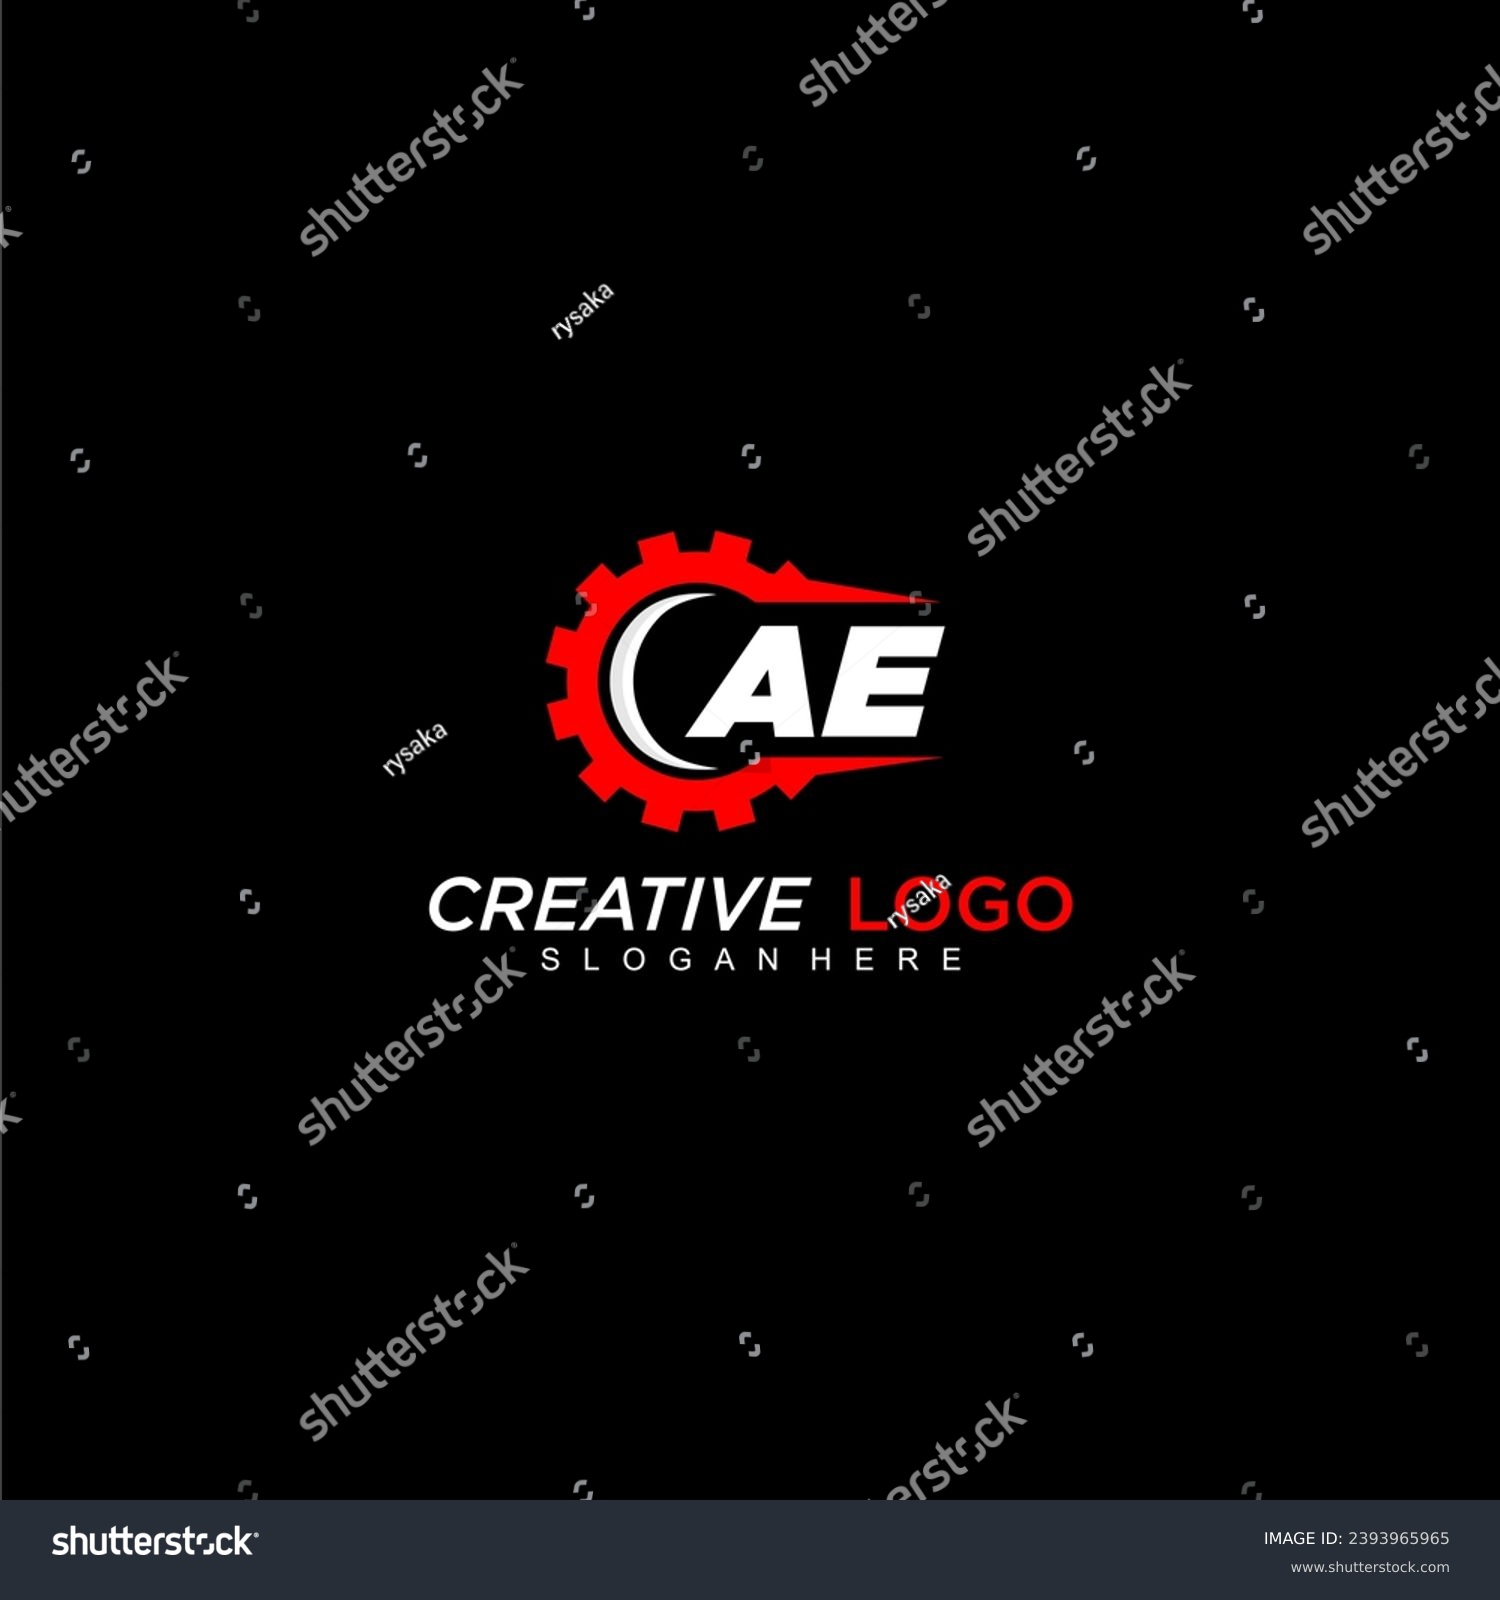 SVG of AE initial monogram for automotive logo with gear wheel image design vector svg